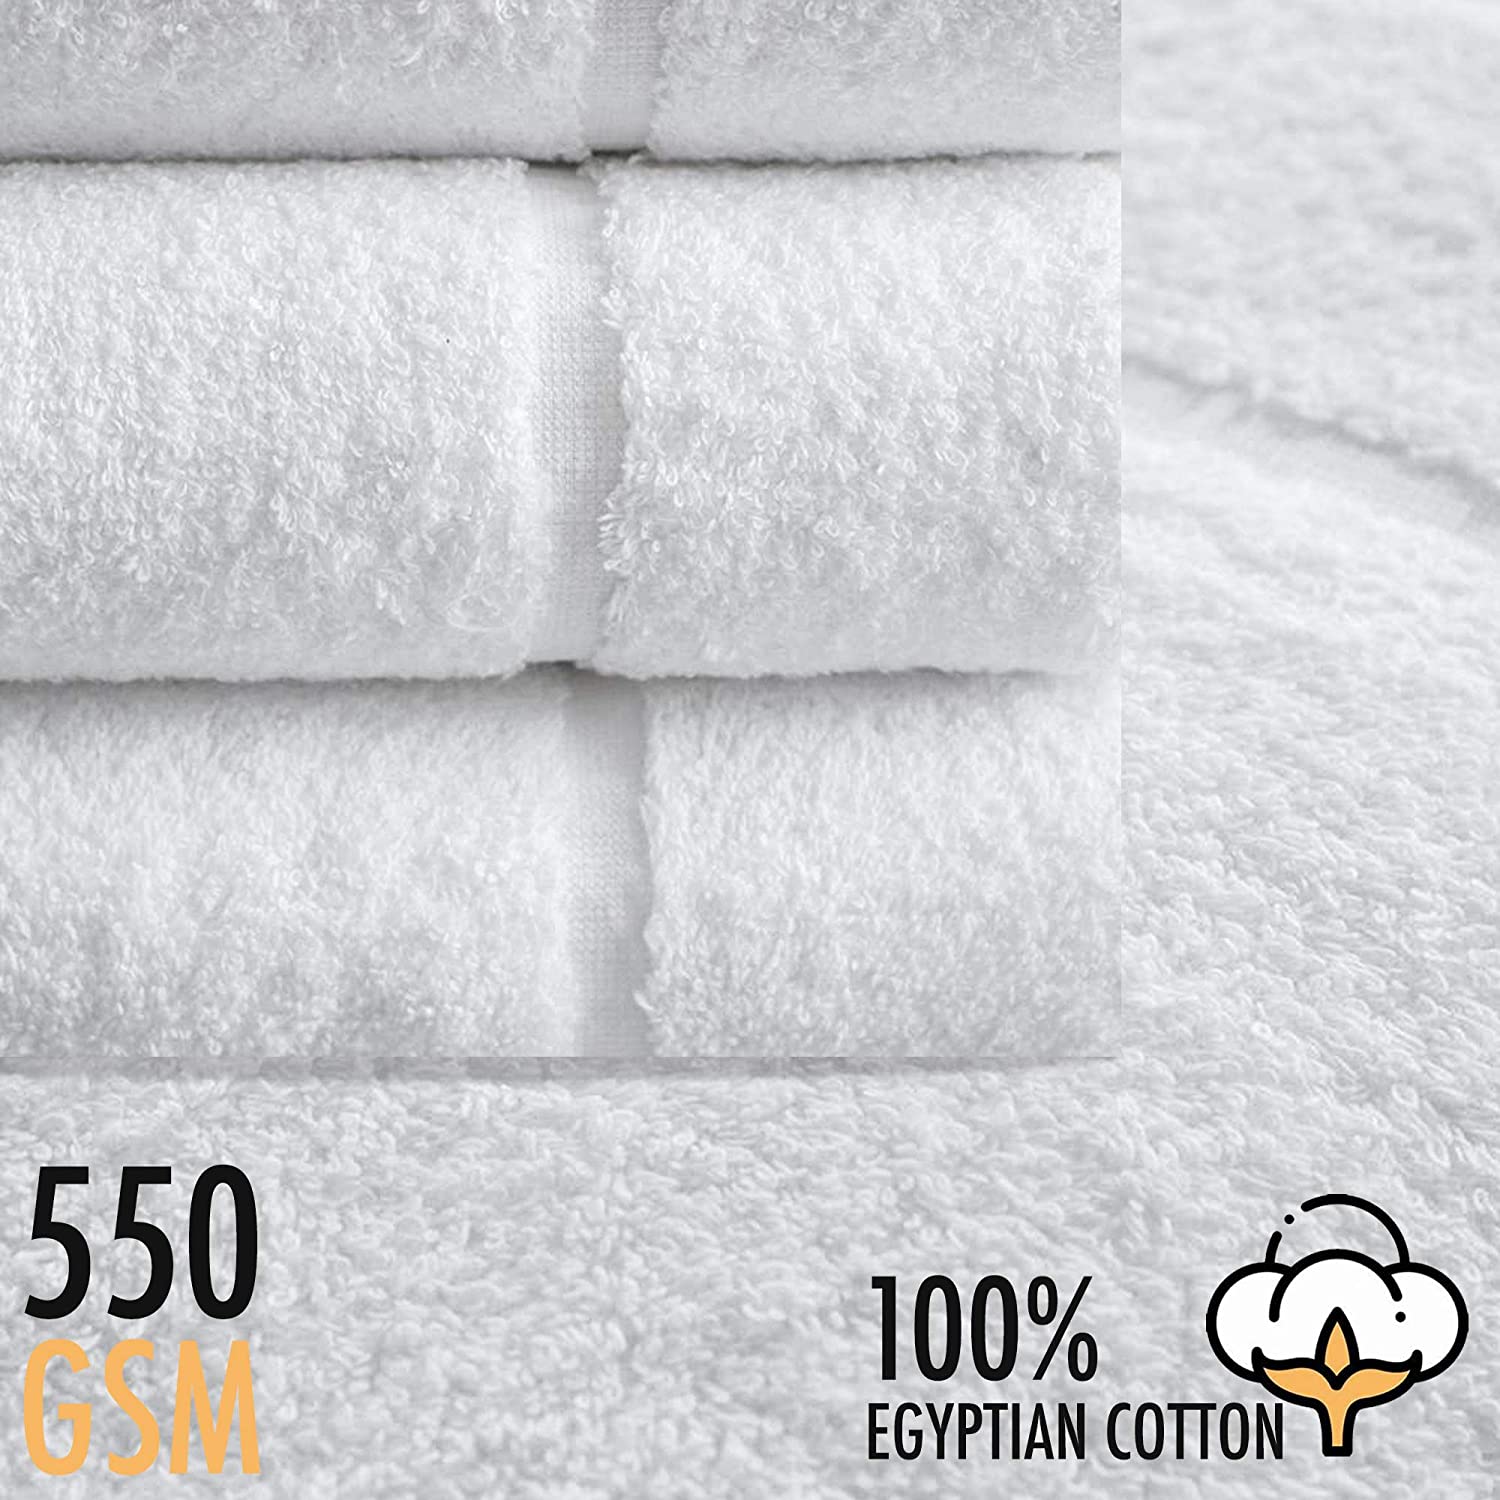 Bartons-Hotel-Quality-Face-Cloths-550GSM